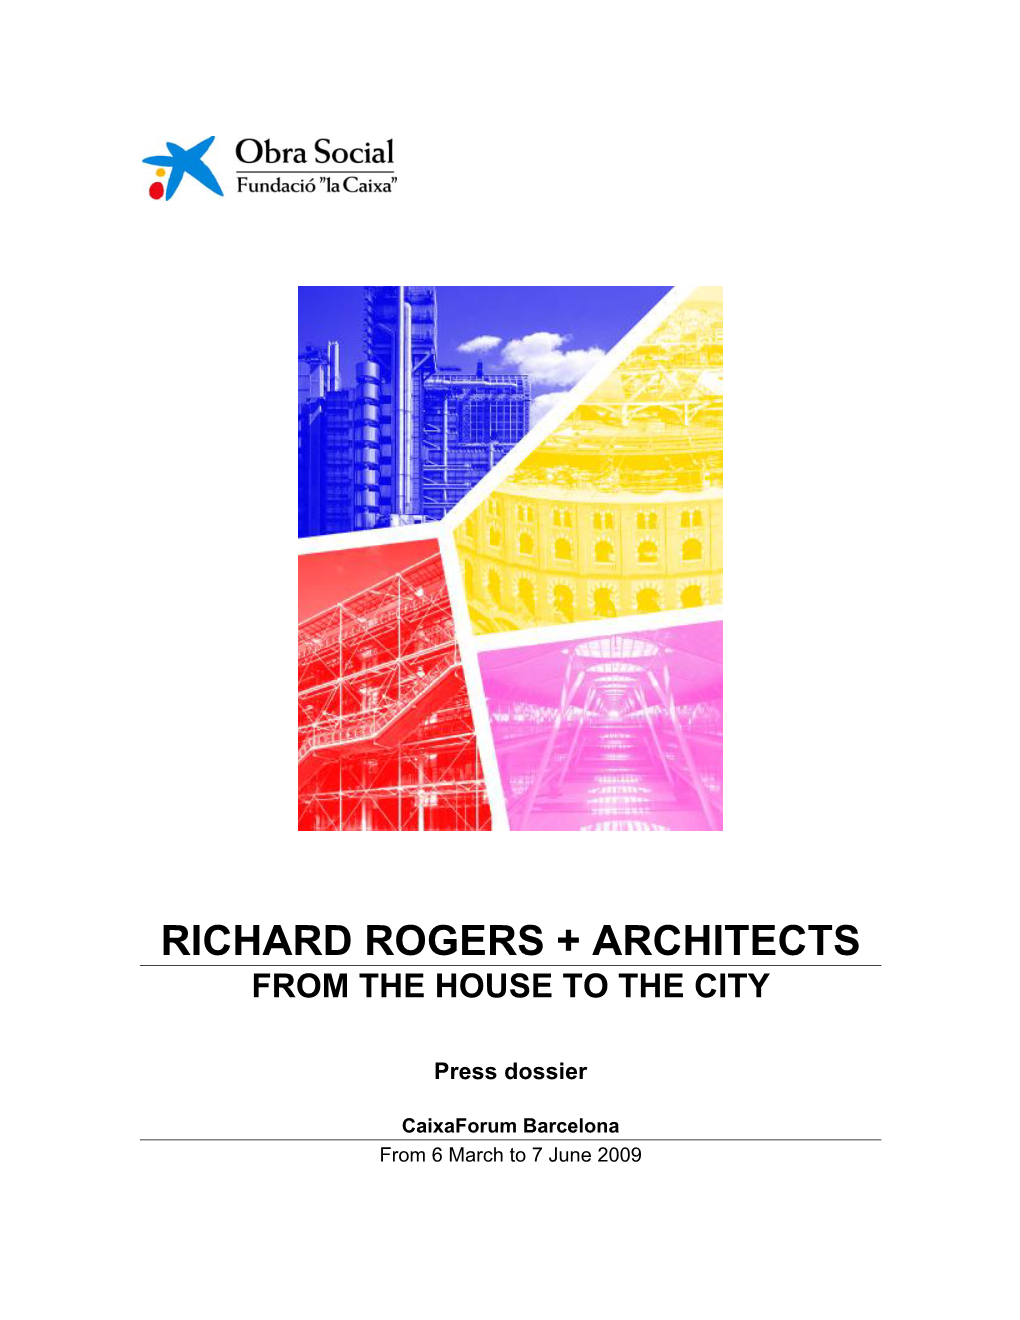 Richard Rogers + Architects from the House to the City